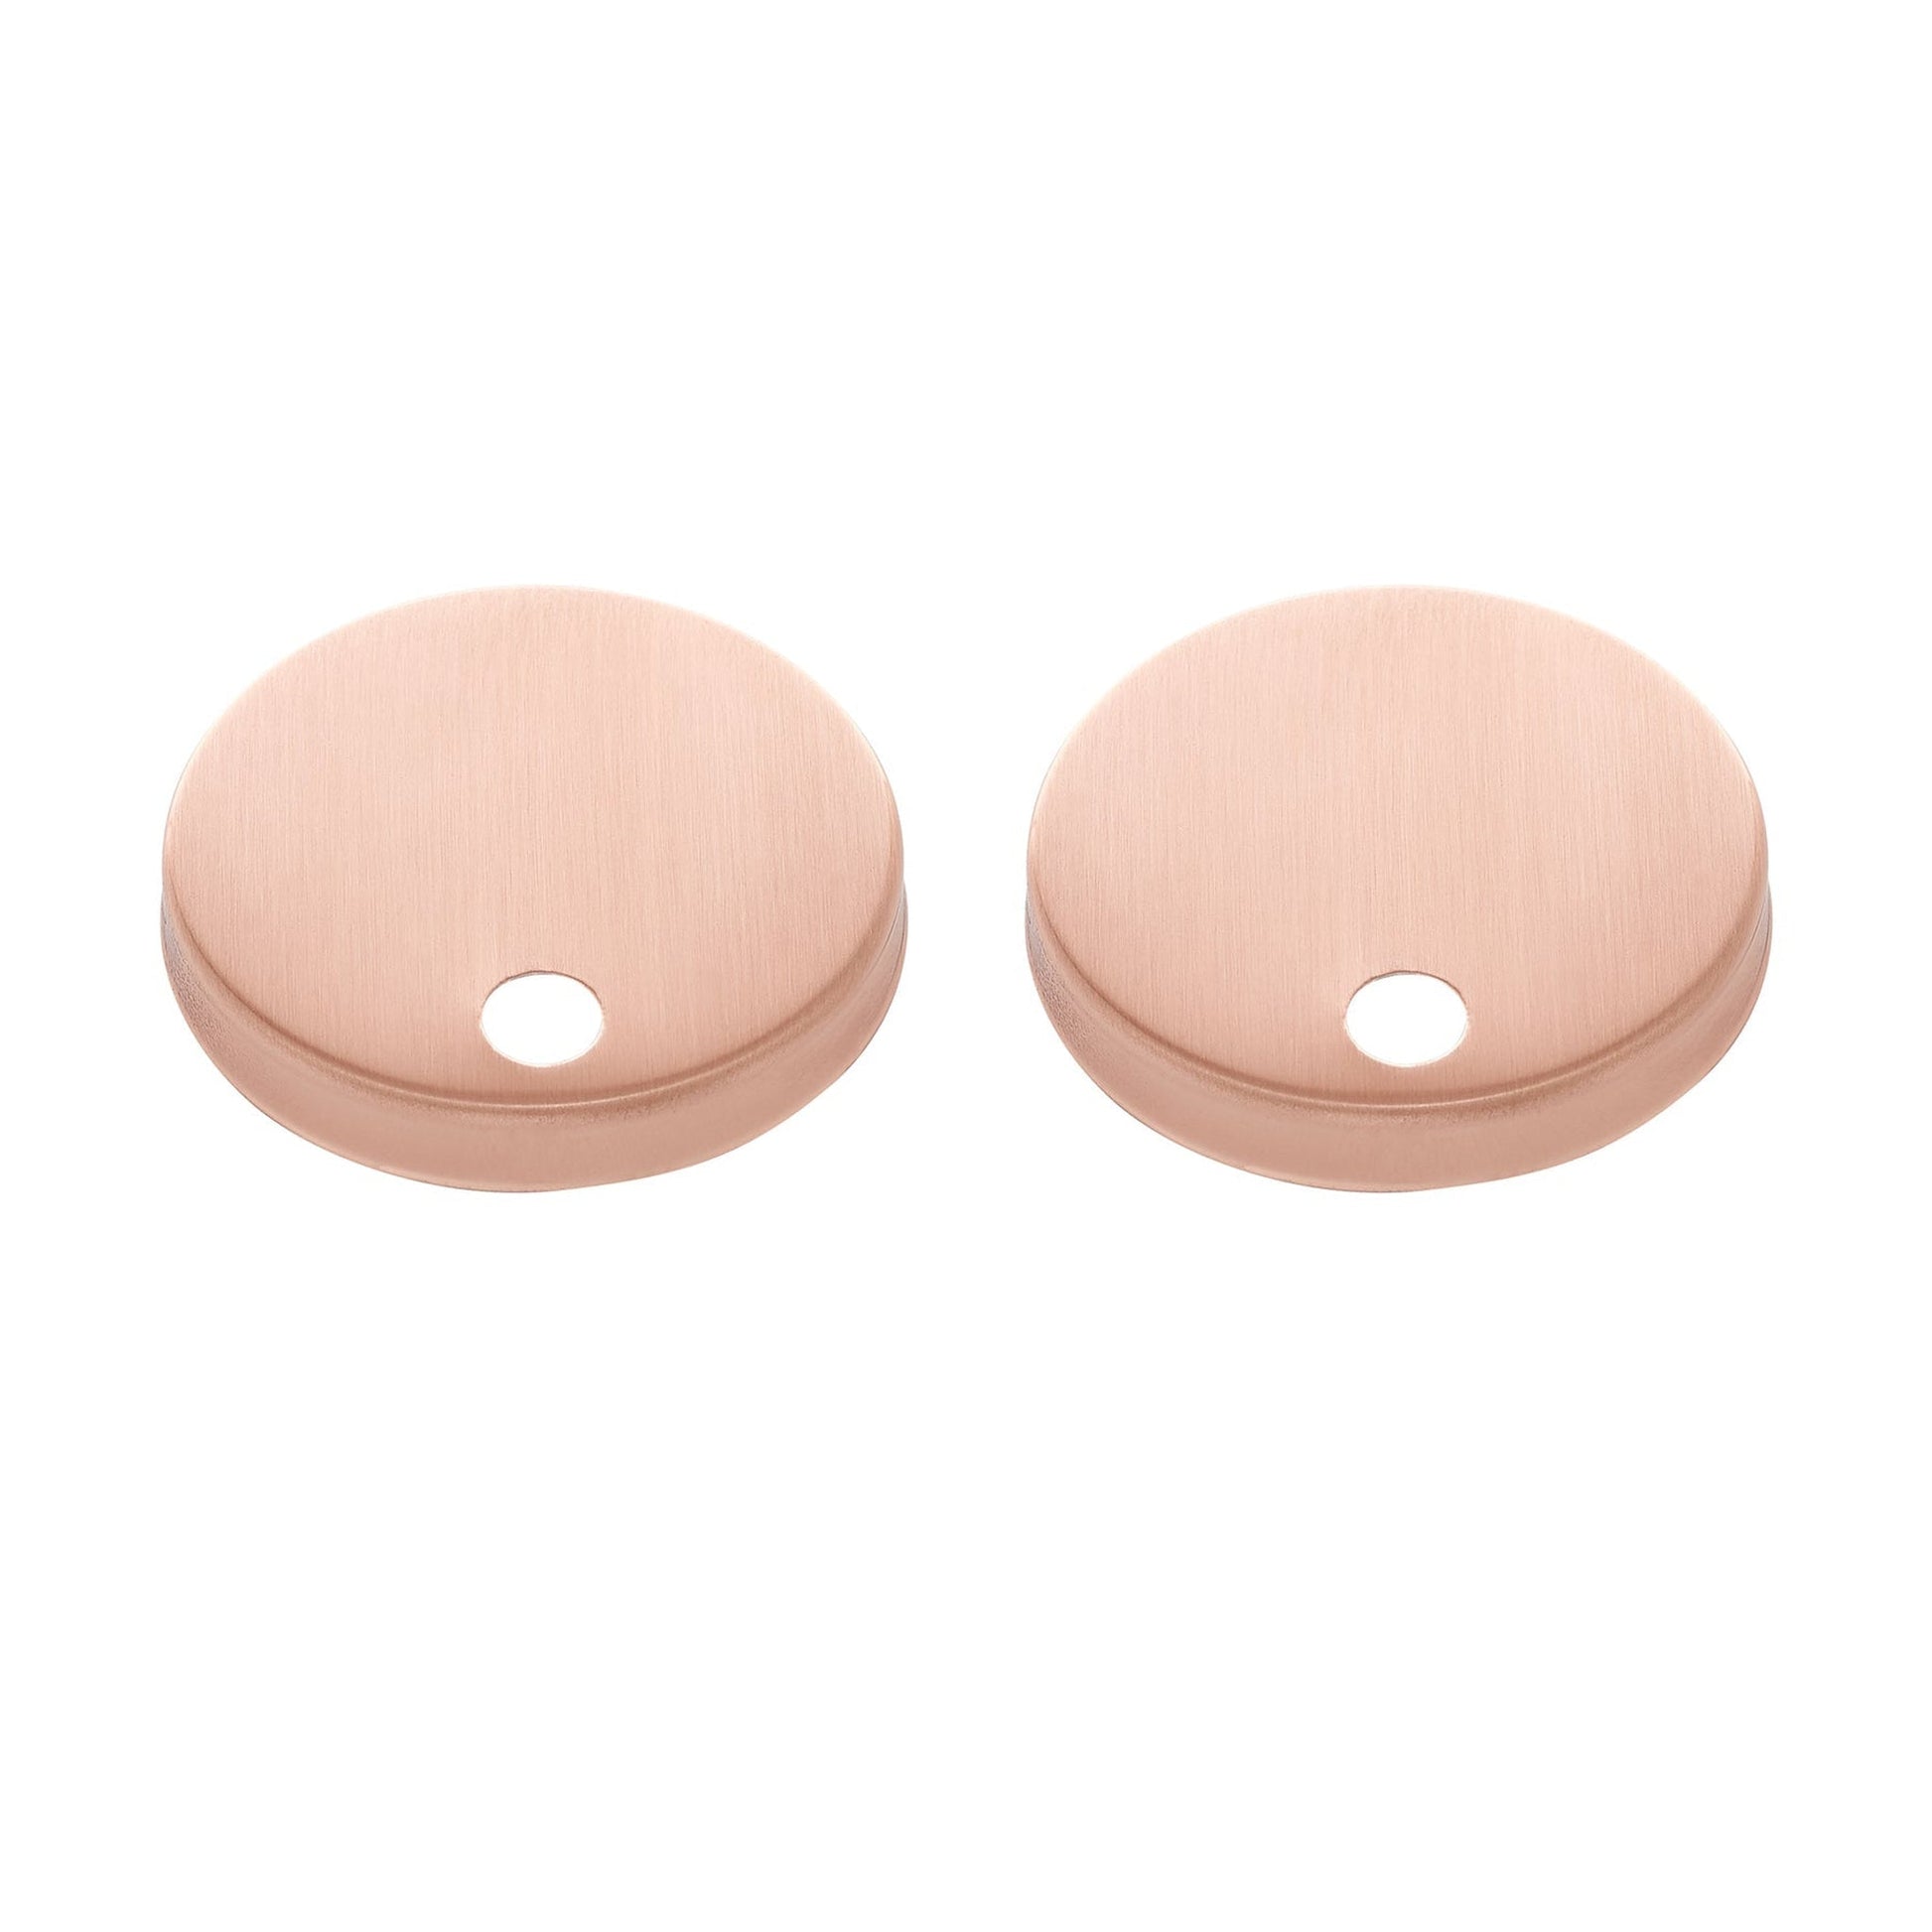 Swiss Madison Round Rose Gold Toilet Push Buttons With QQ Feet For SM-1T112